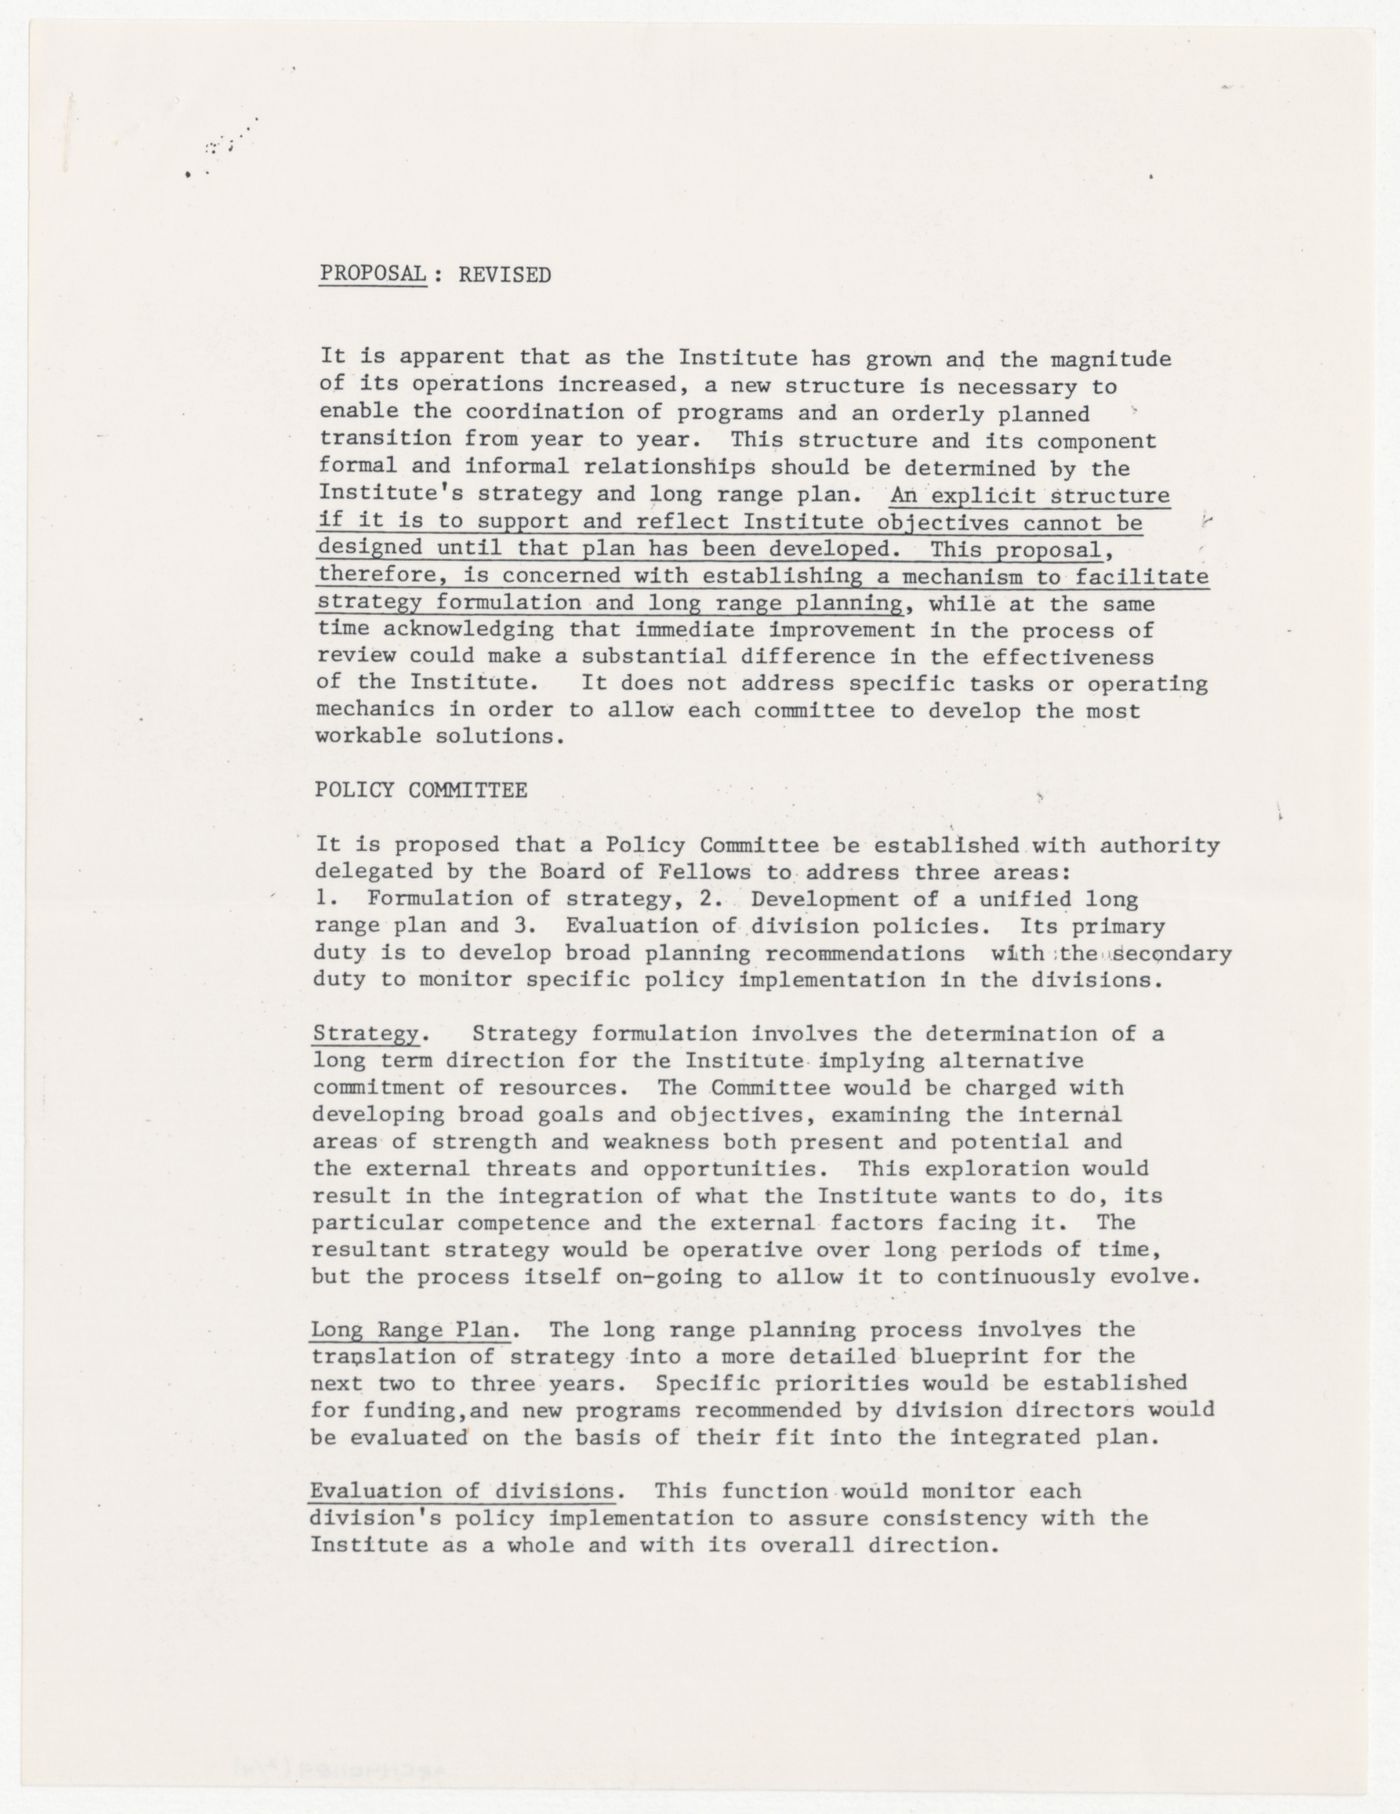 Memorandum from Peter Wolf to the Fellows with attached revised proposal to form a policy committee